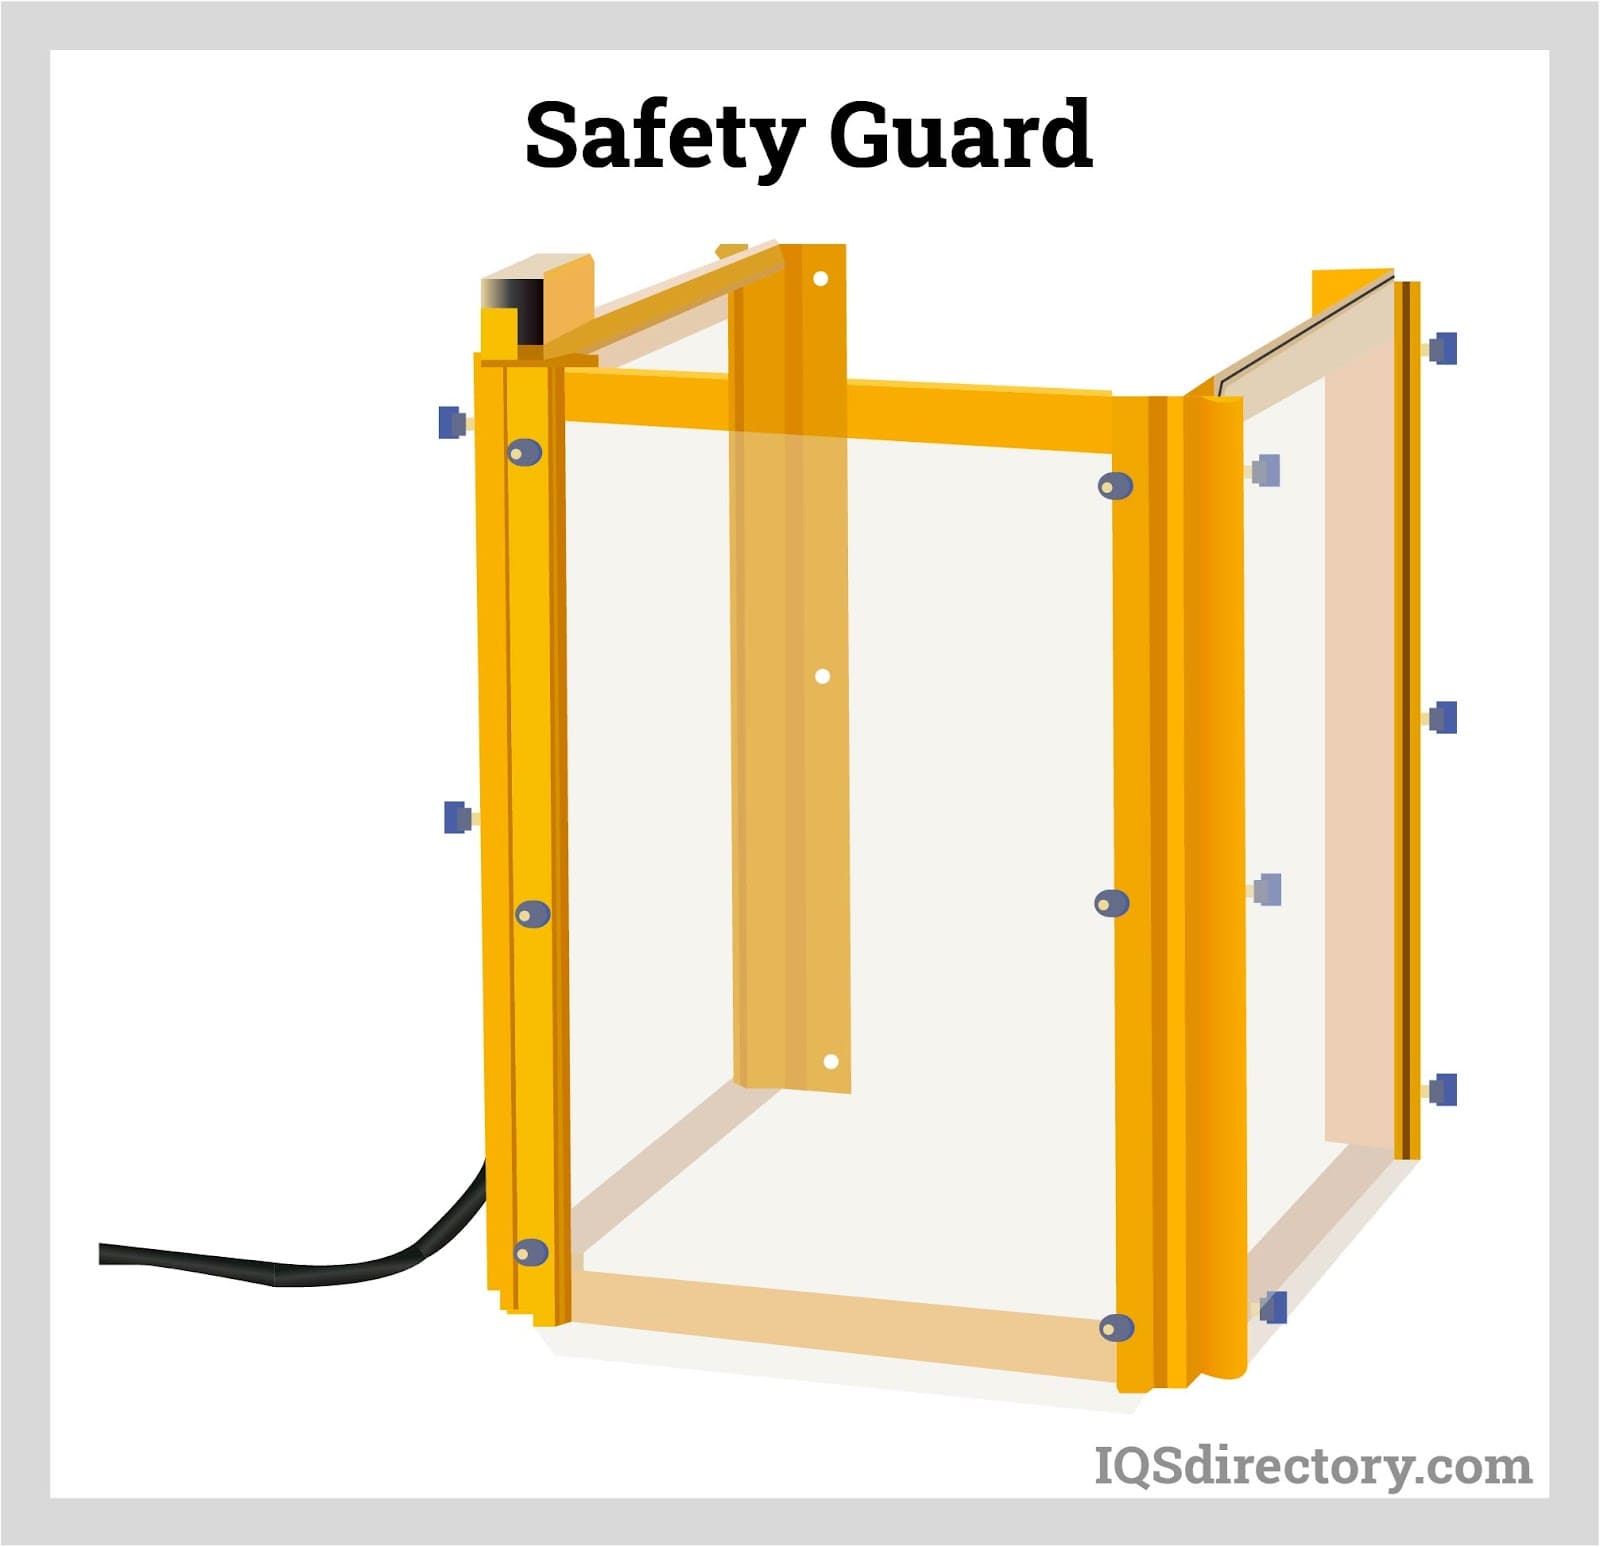 Safety Guard